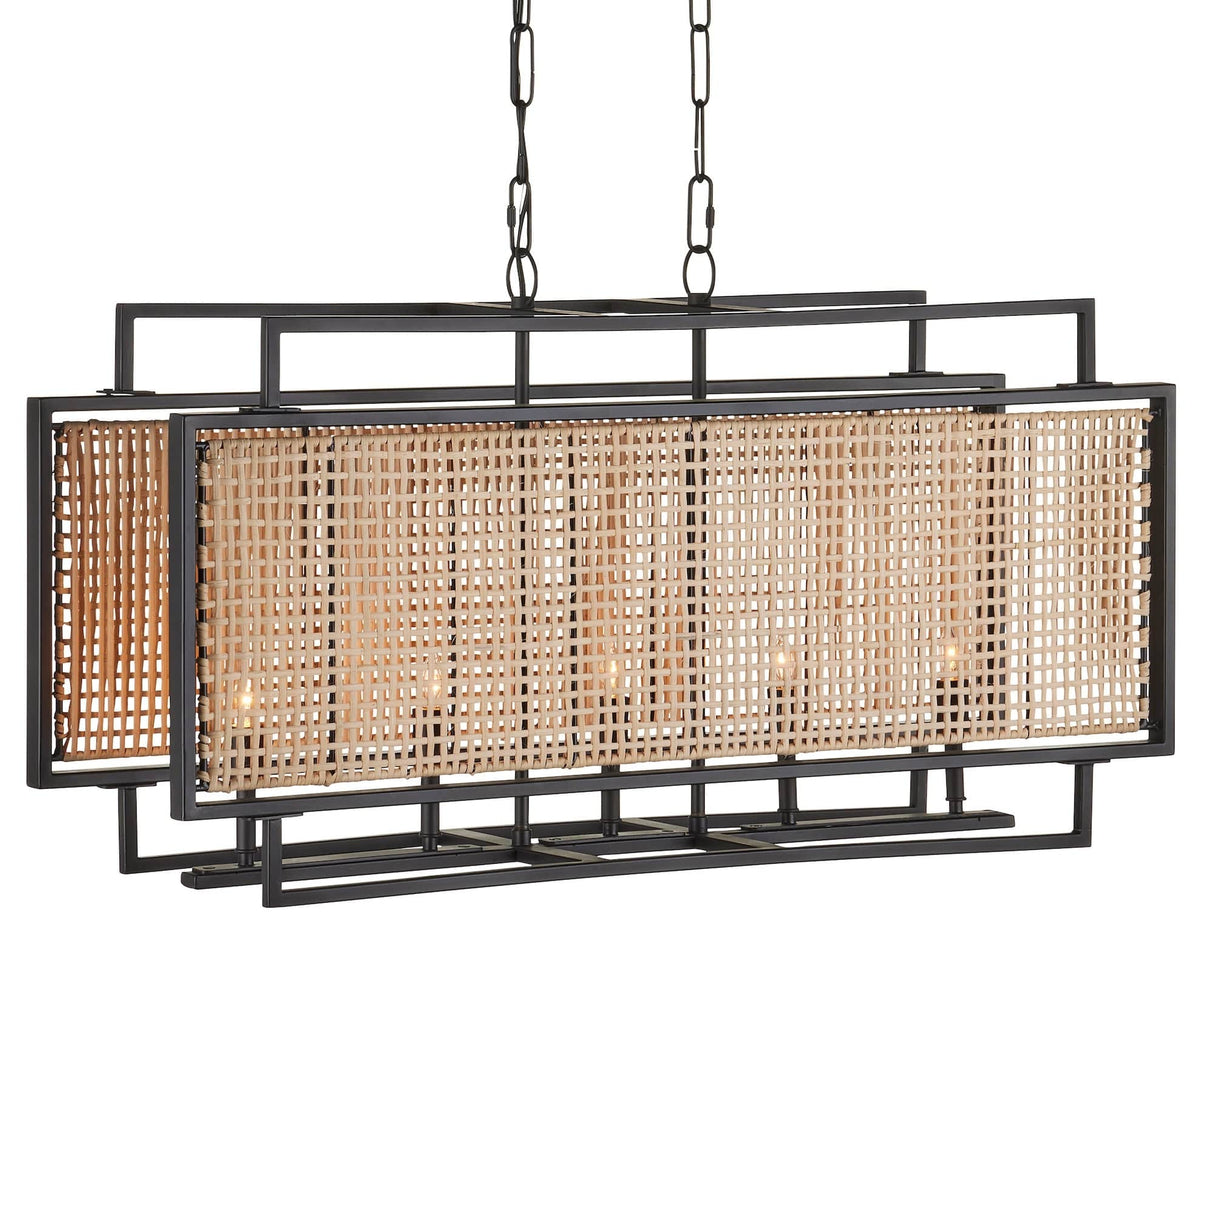 Currey & Company Boswell Rectangular Chandelier Chandeliers